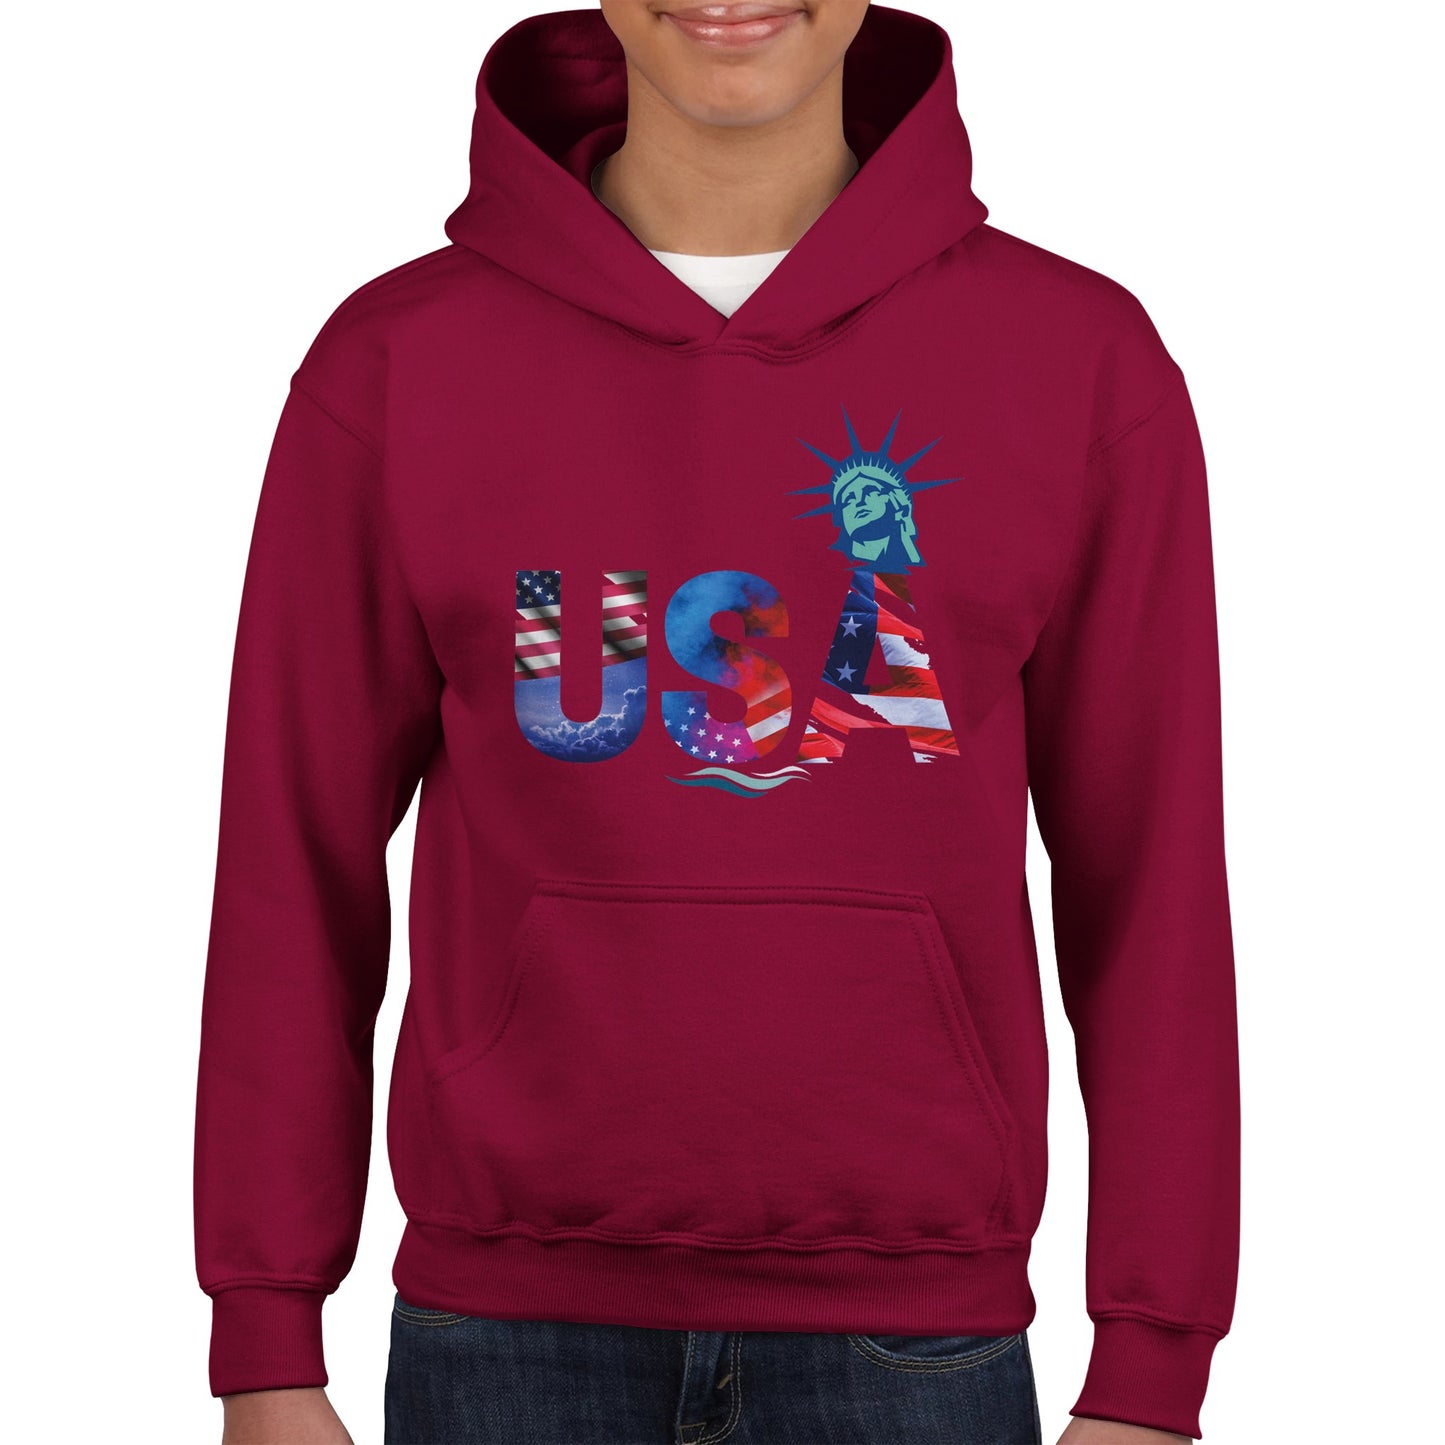 USA Classic Kids Pullover Hoodie